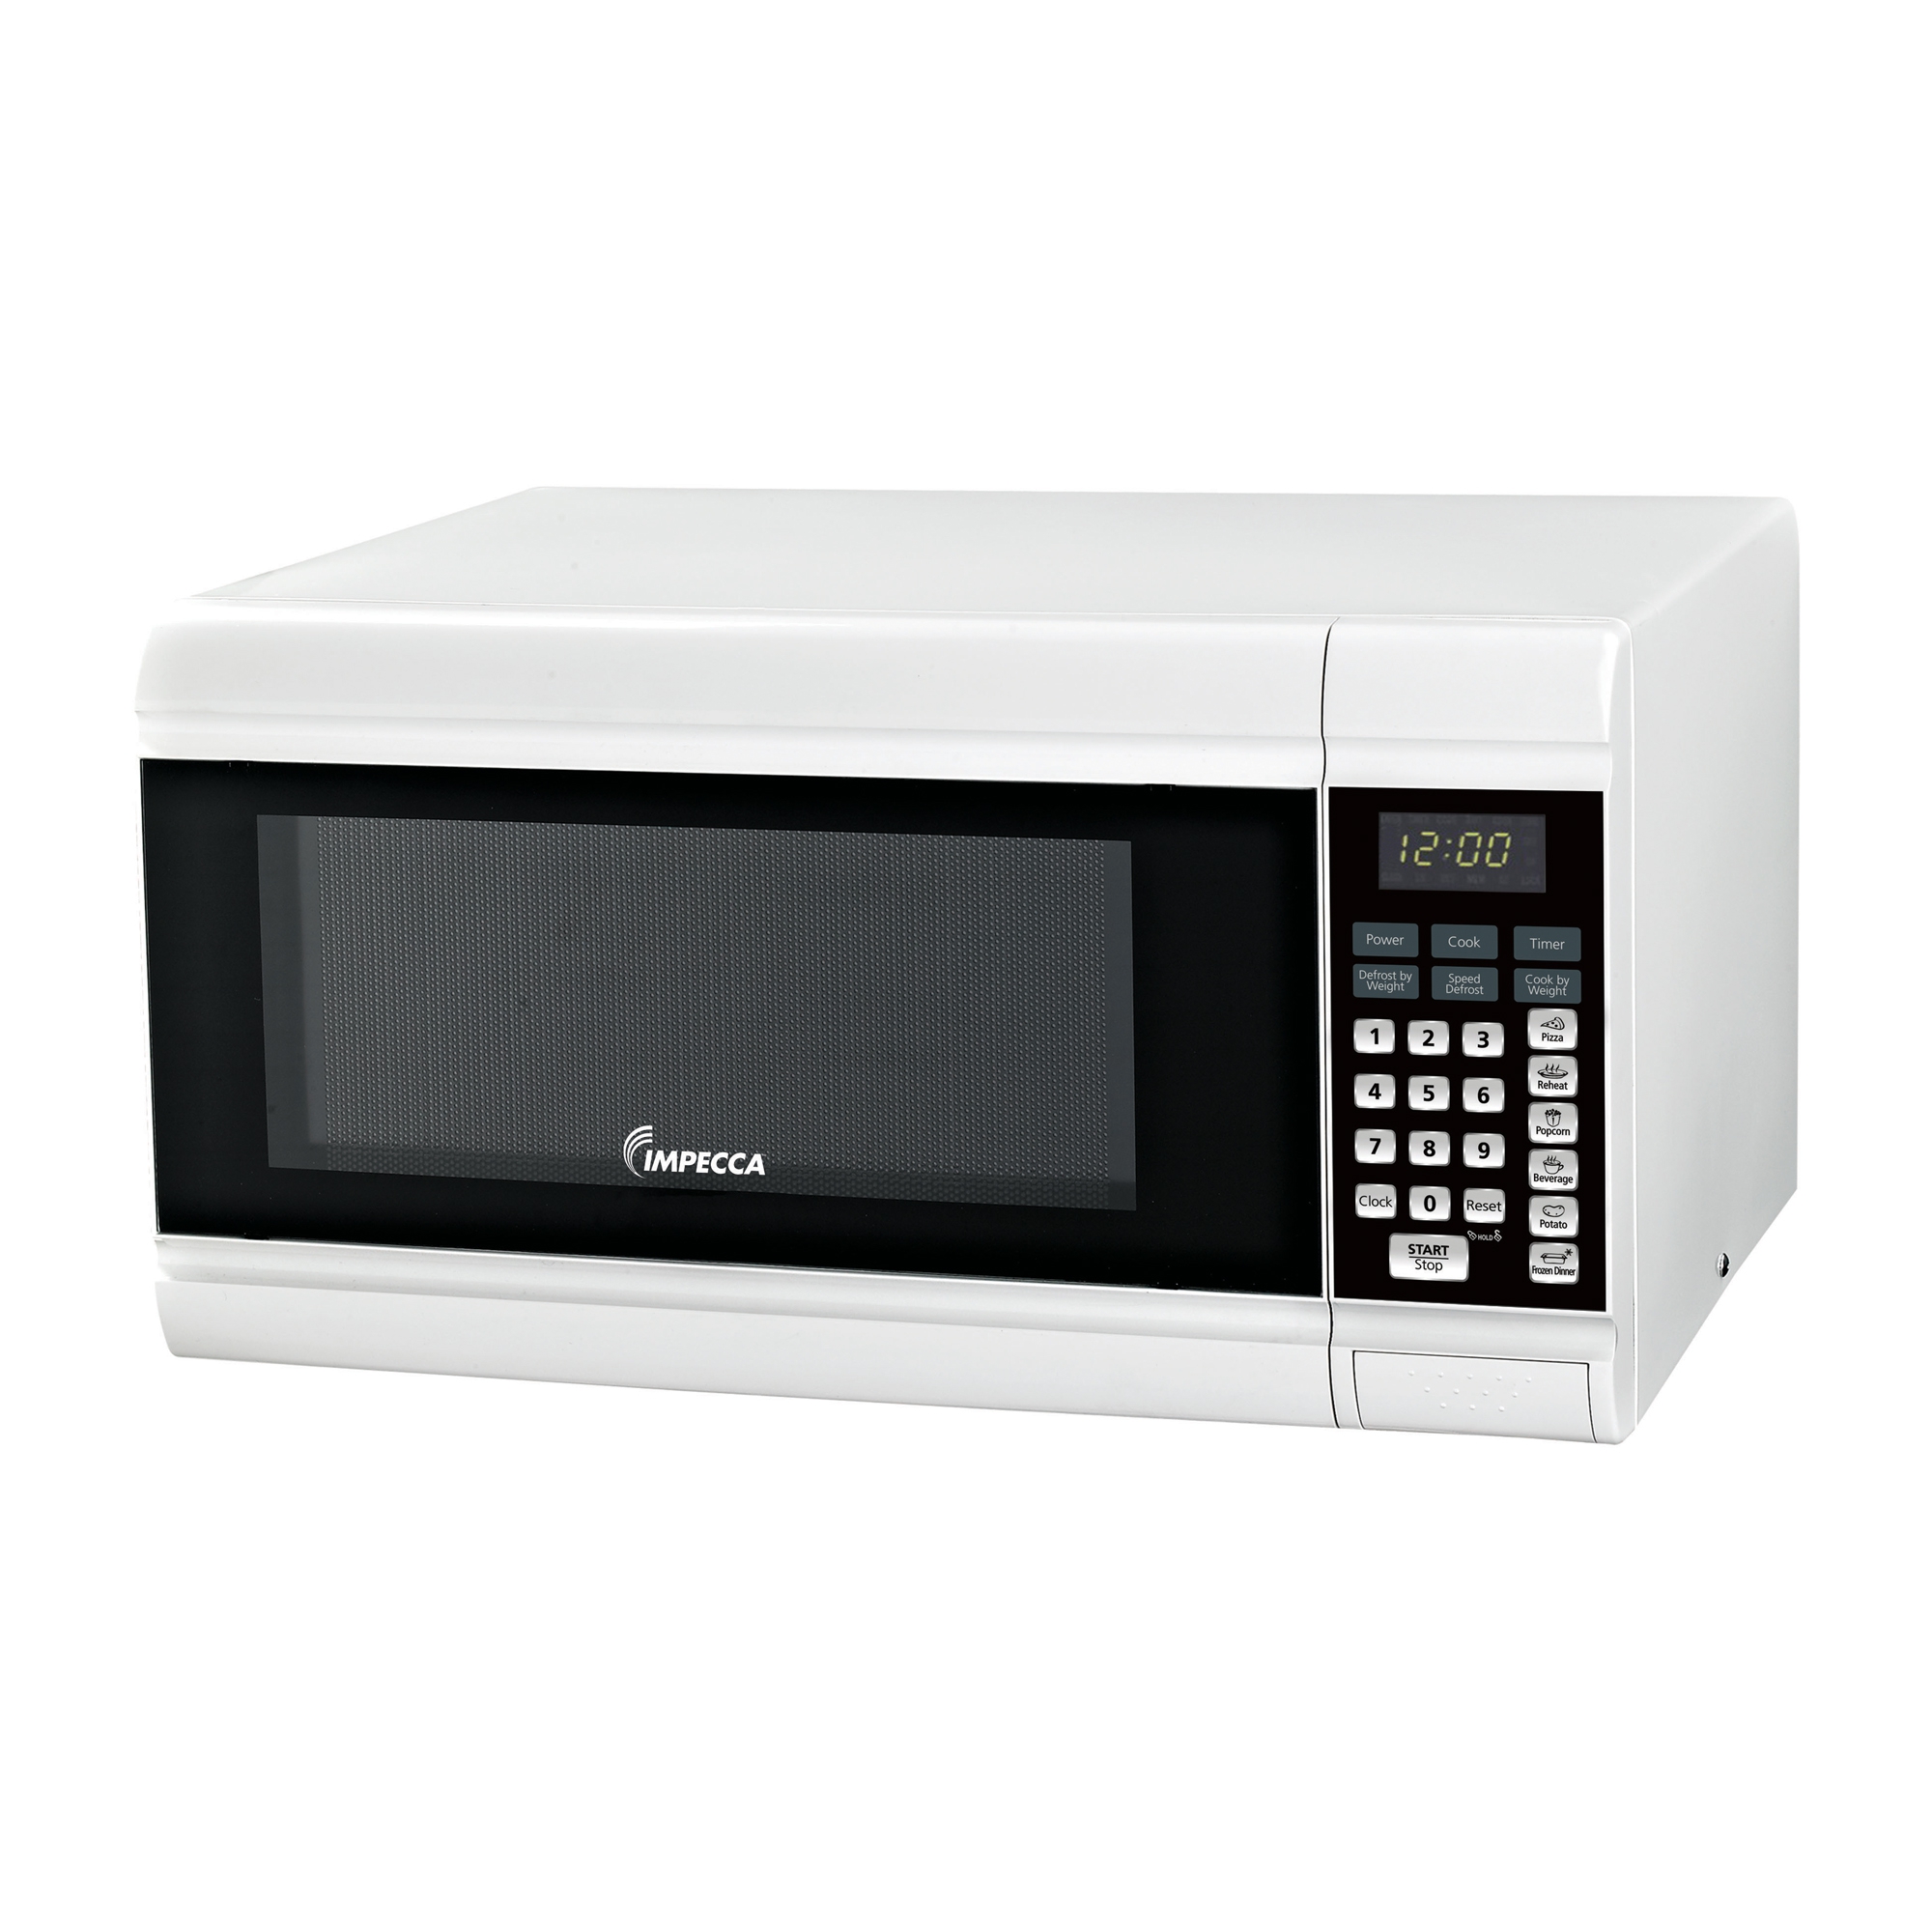 IMPECCA .9 CU FT COUNTER MICROWAVE WHITE